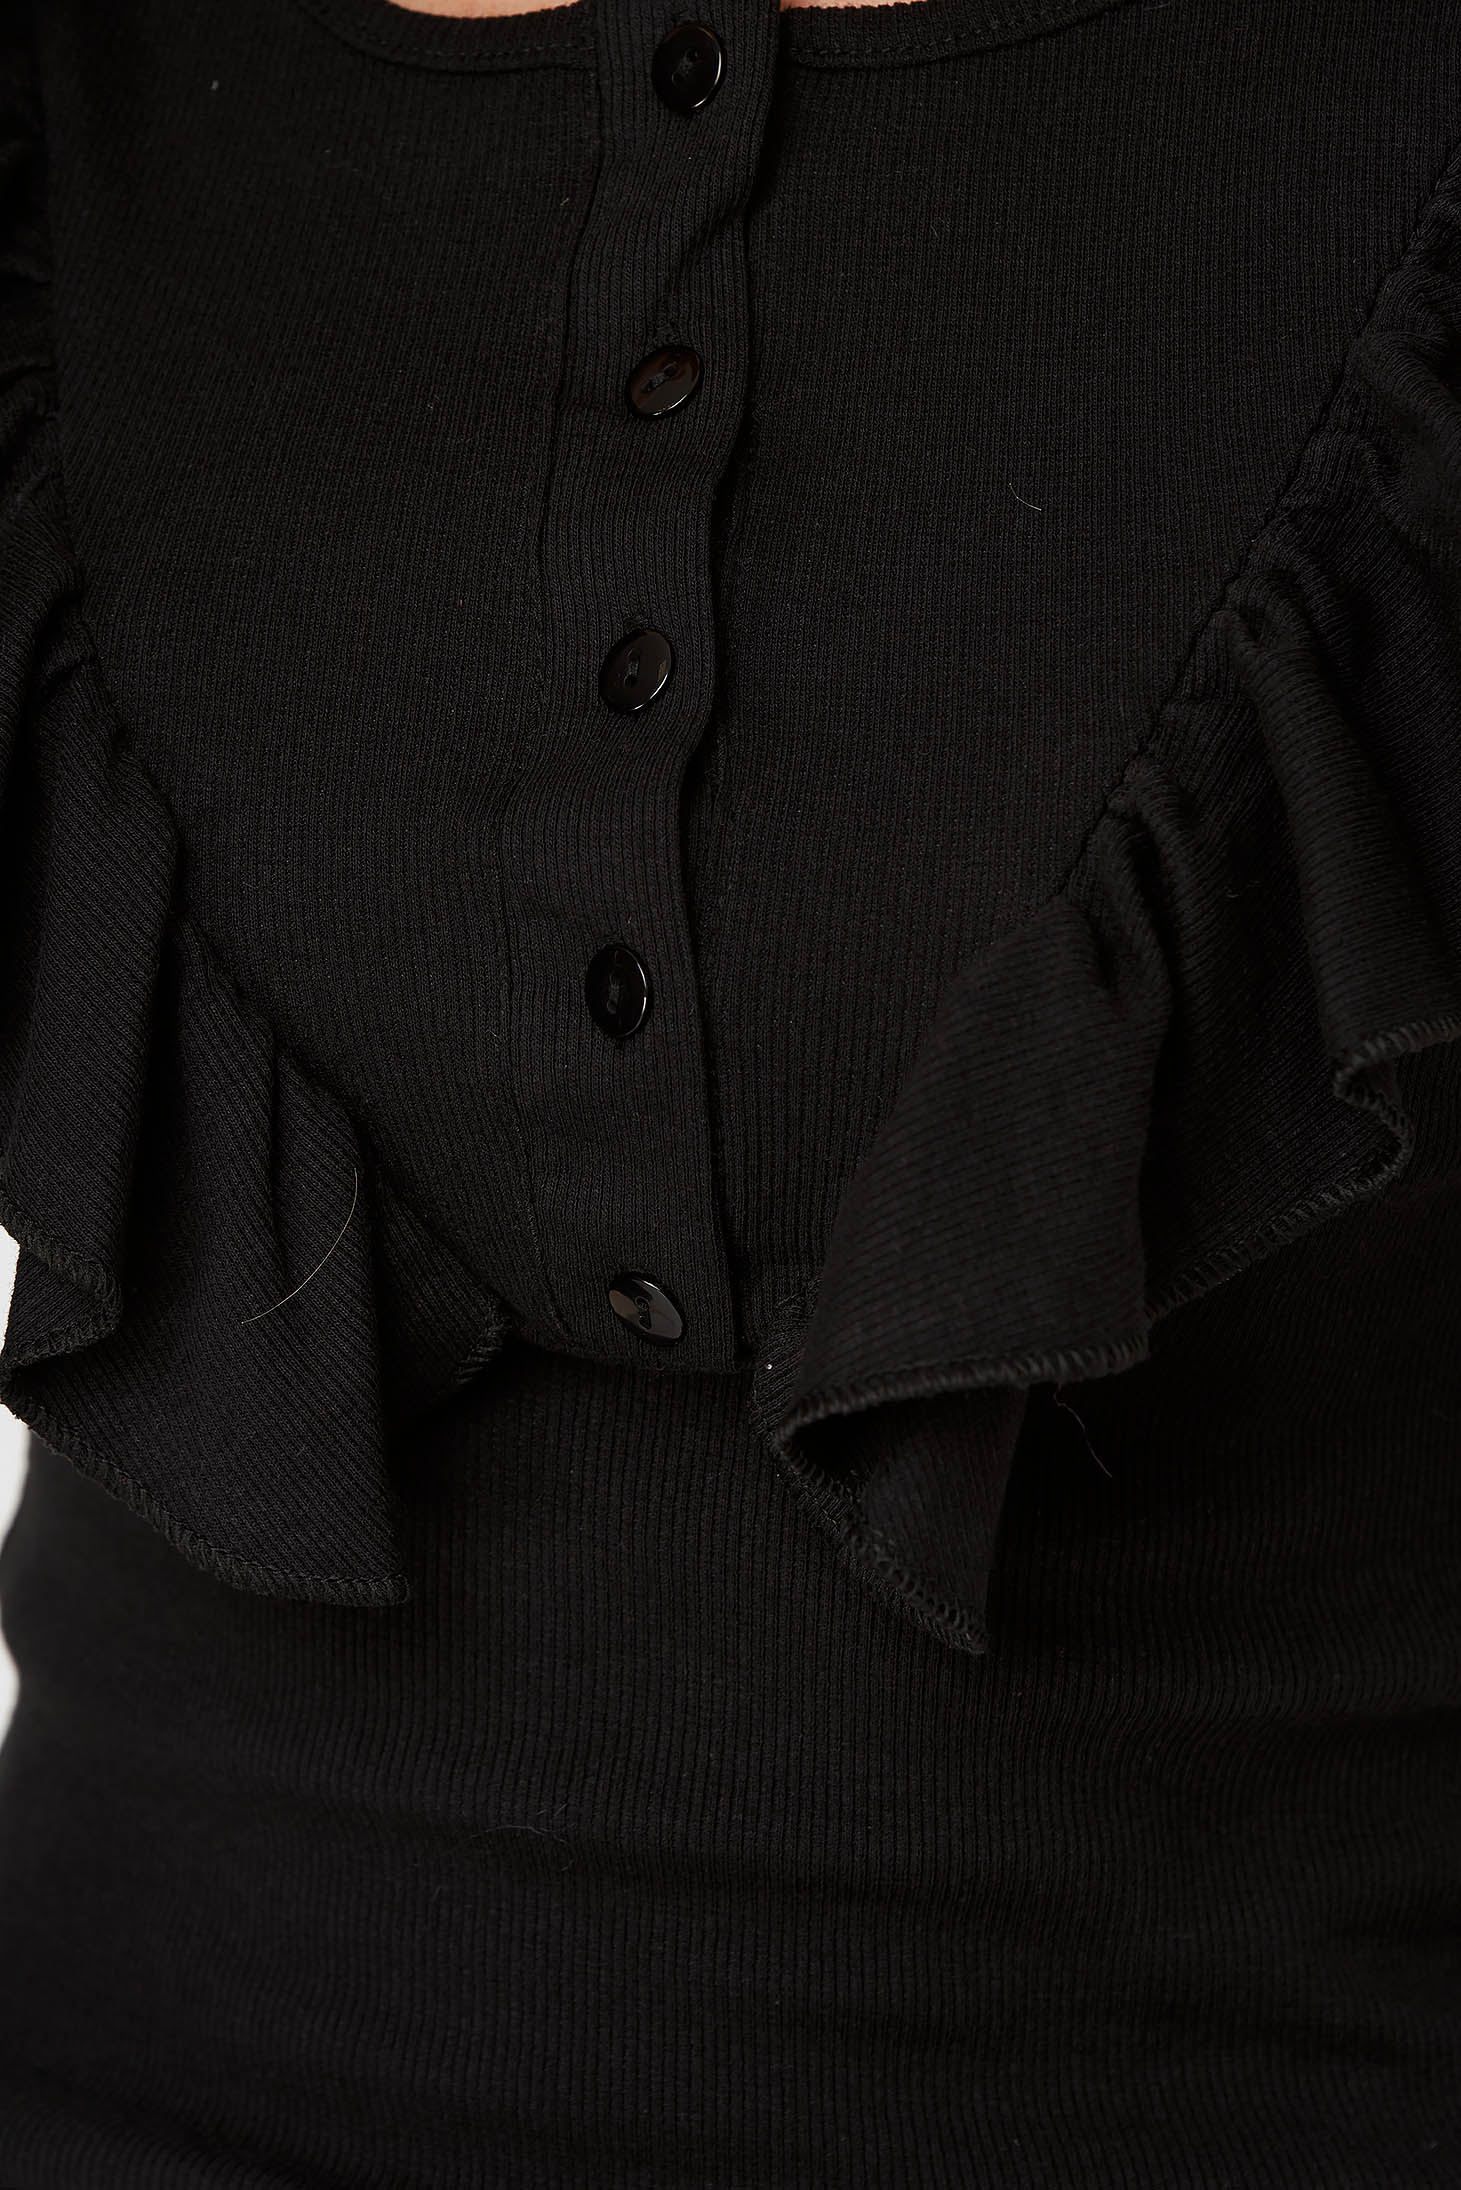 Black fitted ladies blouse made of ribbed cotton, accessorized with buttons and ruffles - SunShine 5 - StarShinerS.com